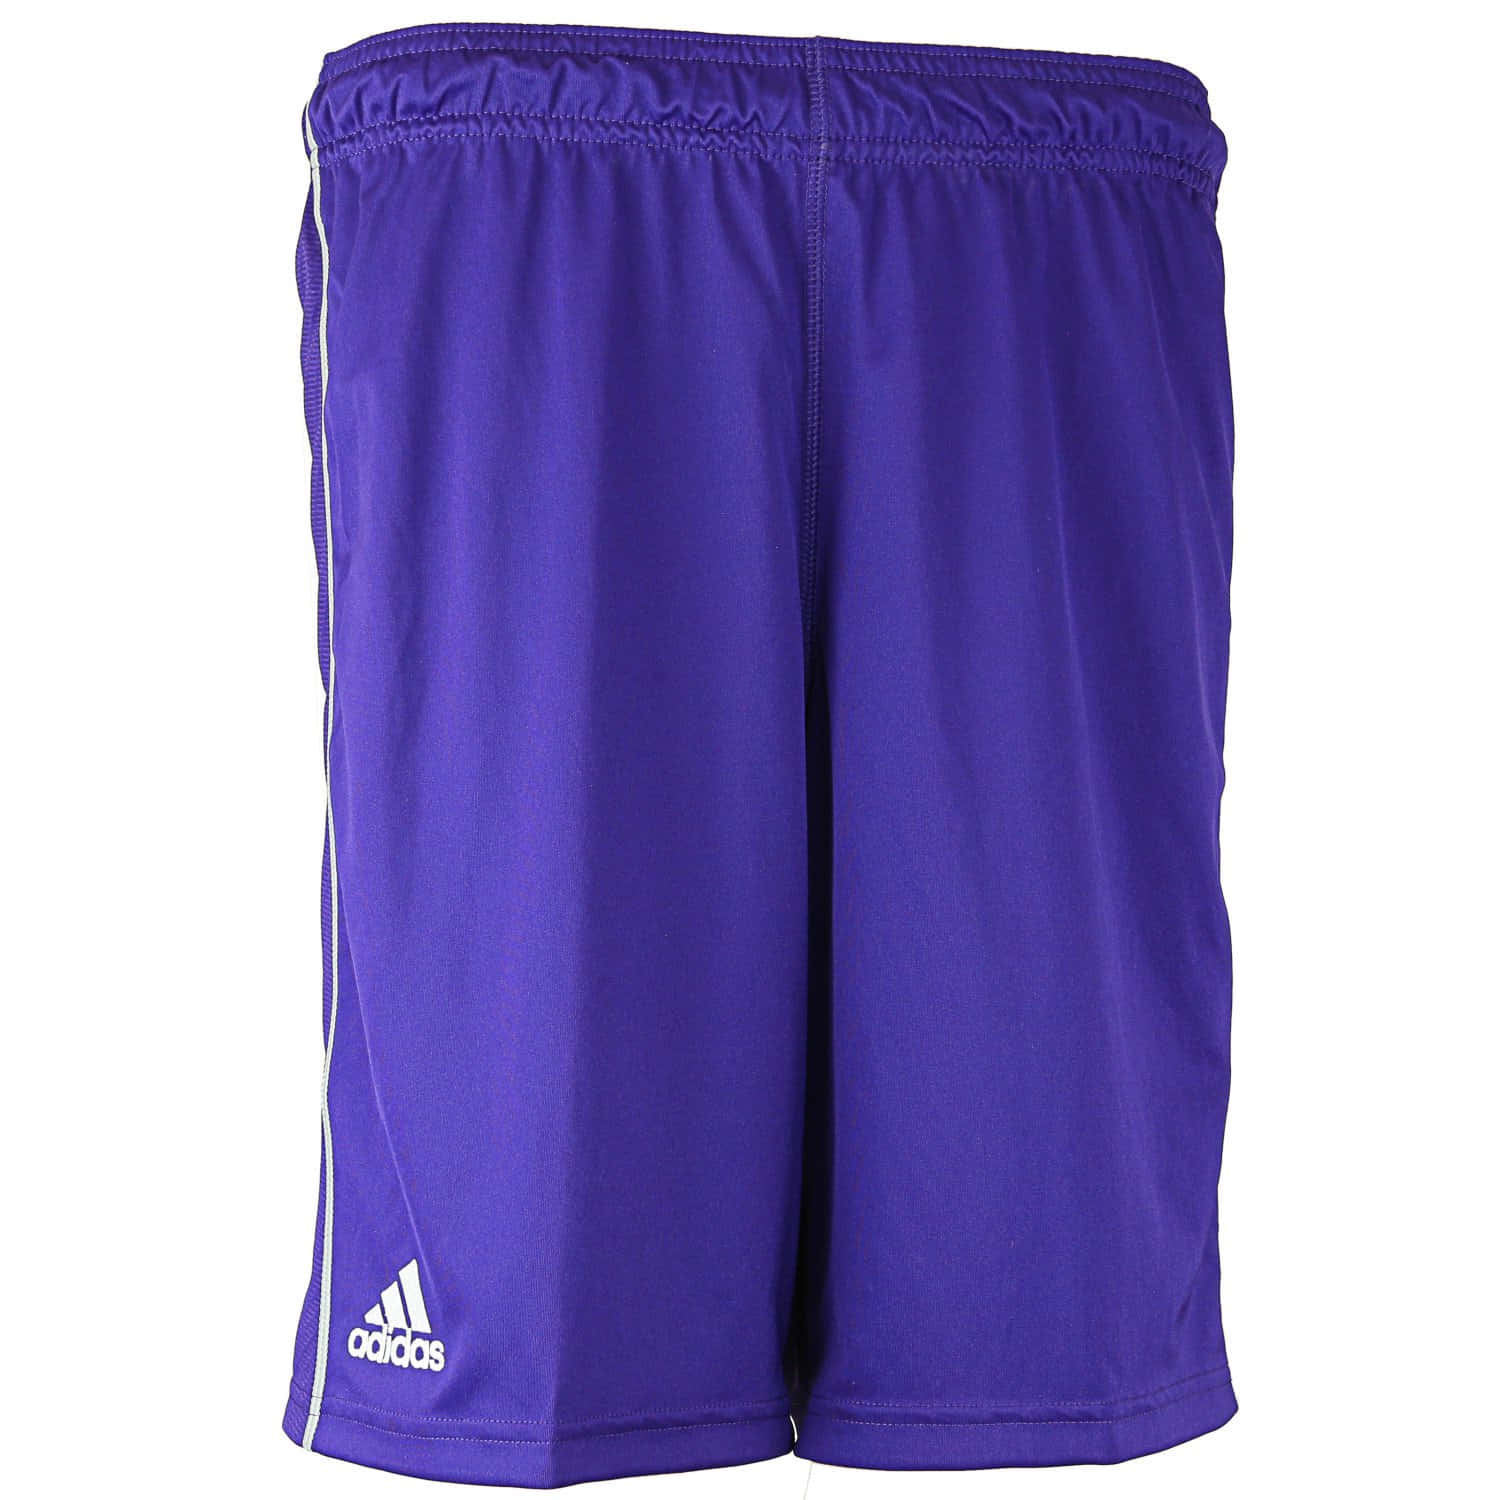 A Pair of Stylish and Comfortable Purple Shorts Wallpaper